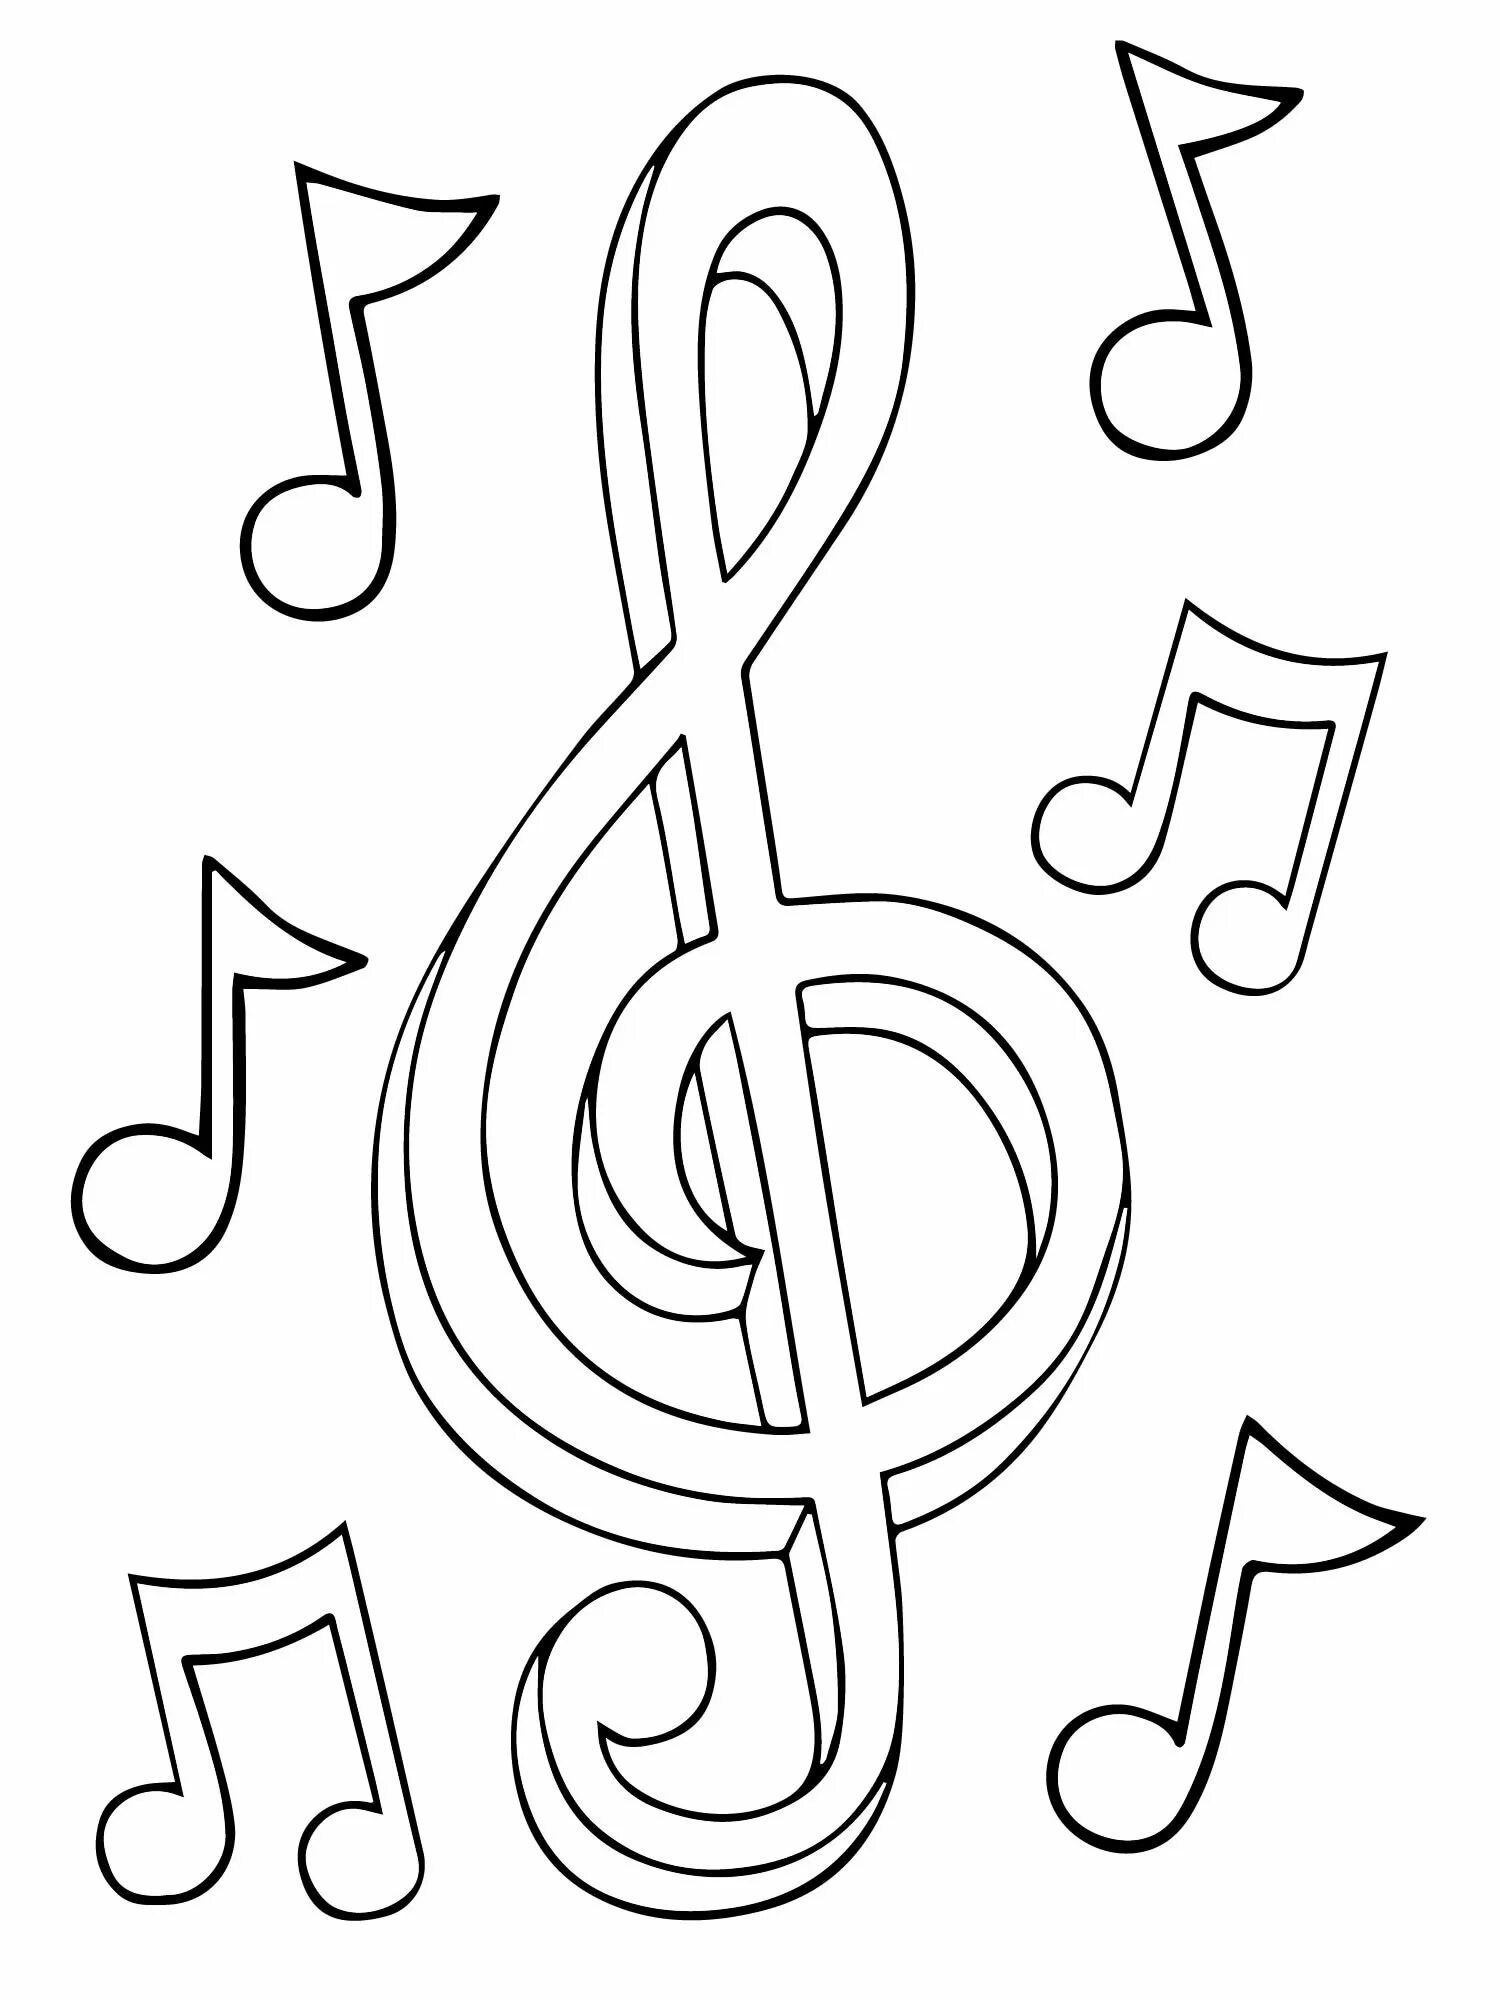 Charming melody coloring page